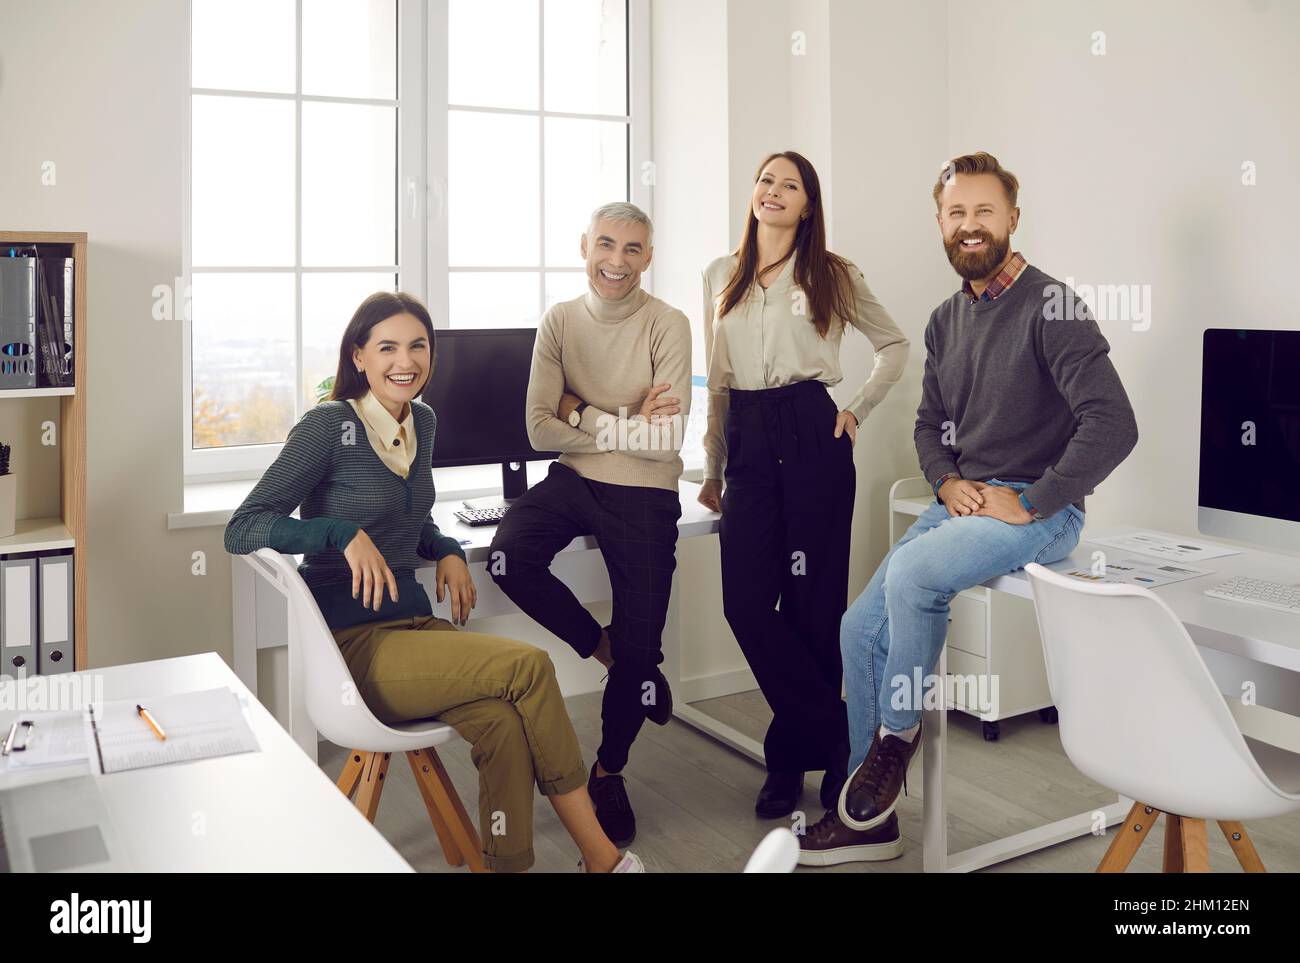 Group portrait of happy, smiling corporate employees in a modern office workplace Stock Photo